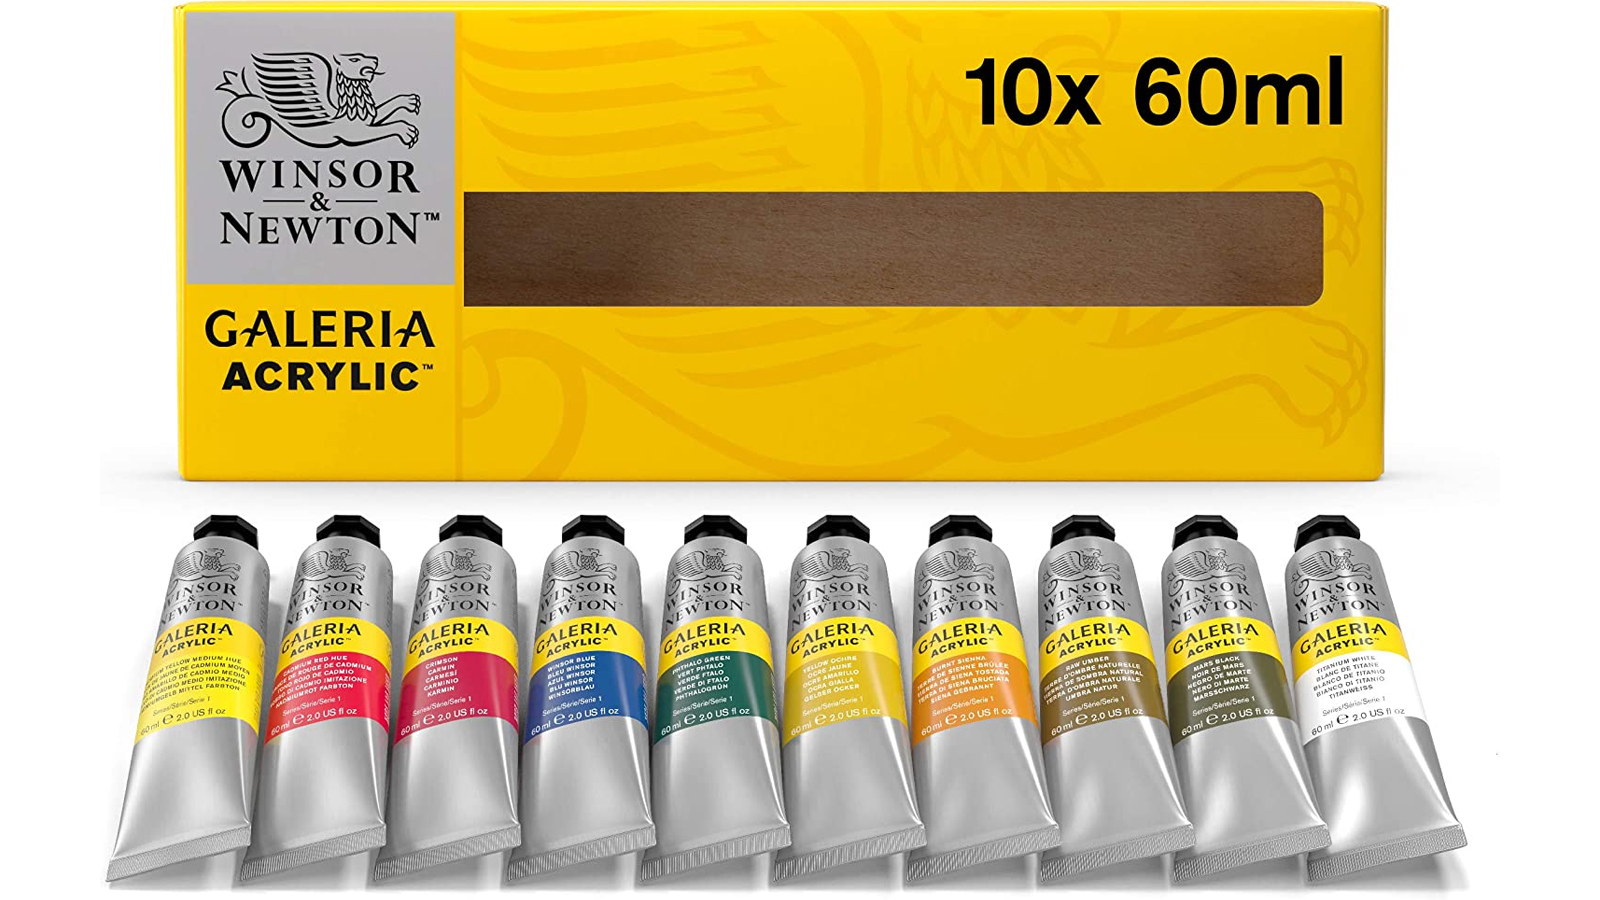 A set of Galleria acrylics by Winsor and Newton